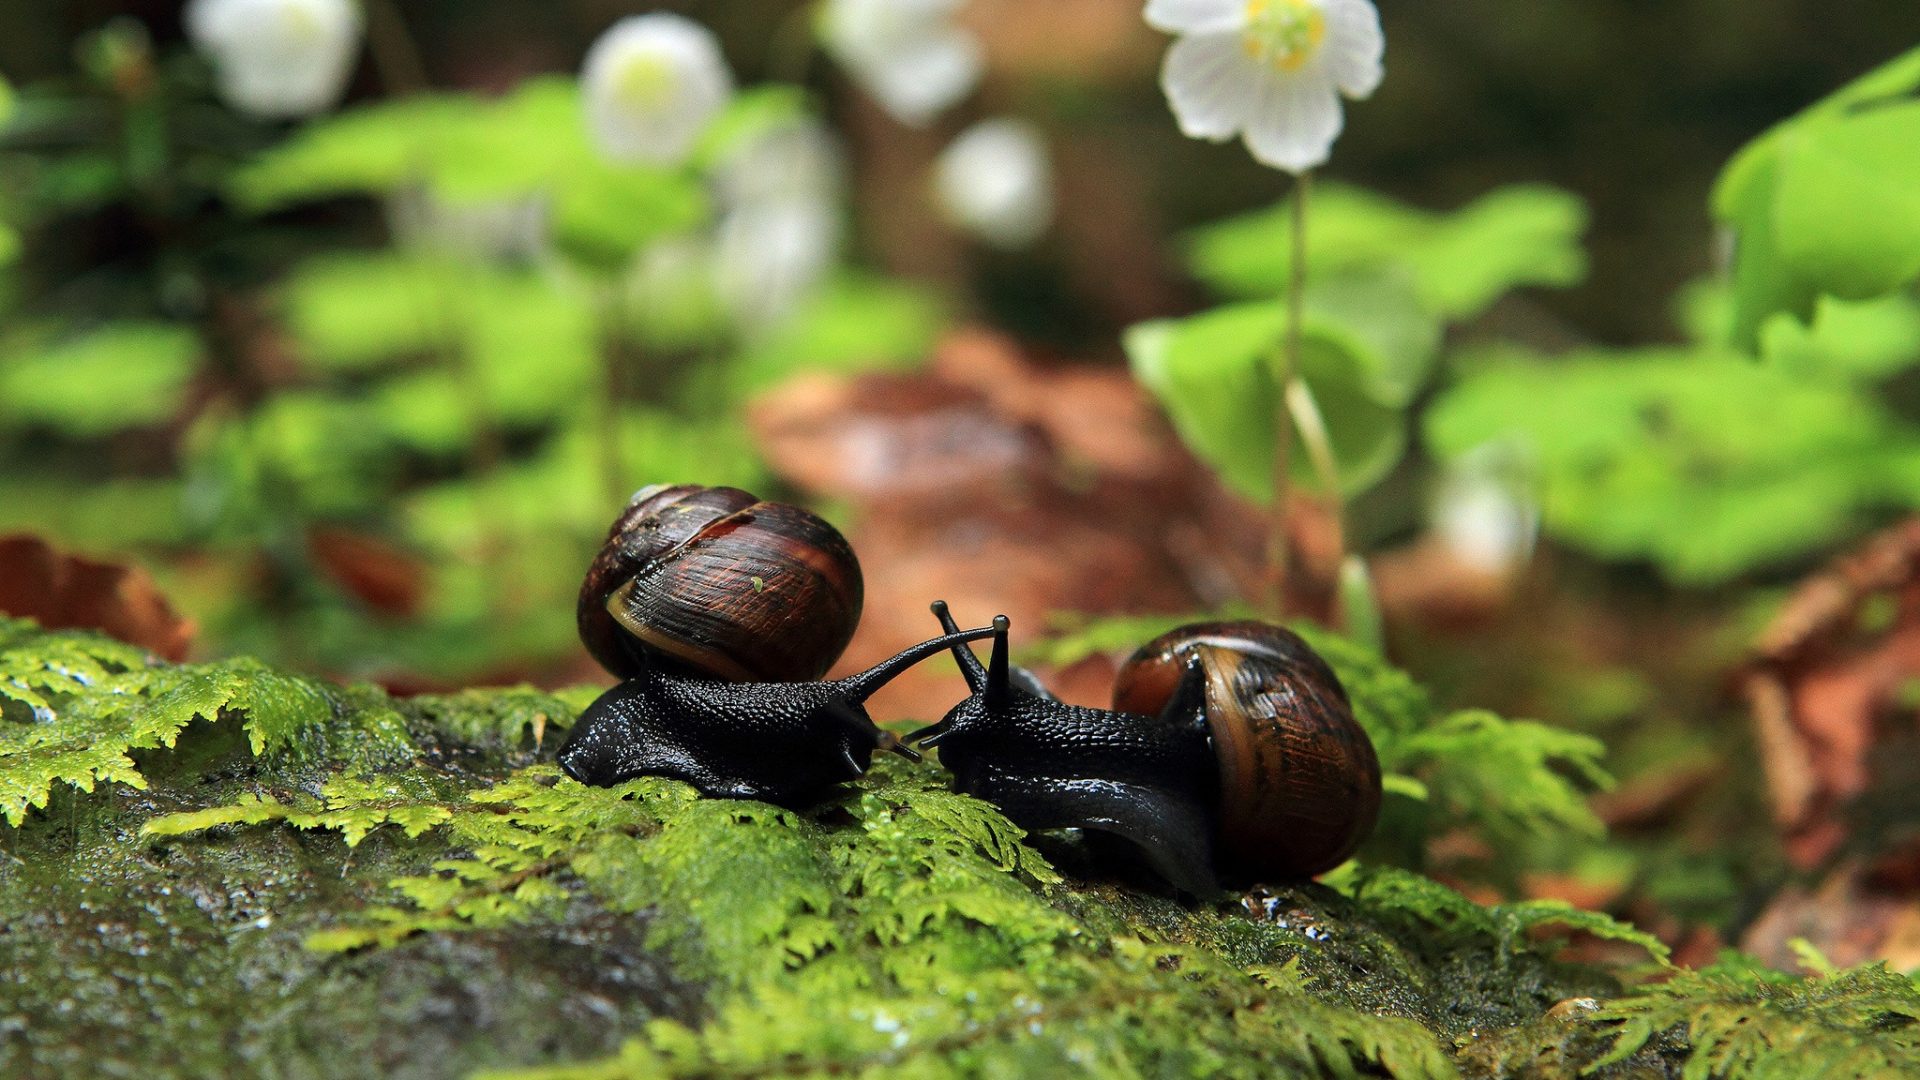 Flowers Macro Leaves Snails Bridesmaids Animals Image - Snail Pc Background , HD Wallpaper & Backgrounds